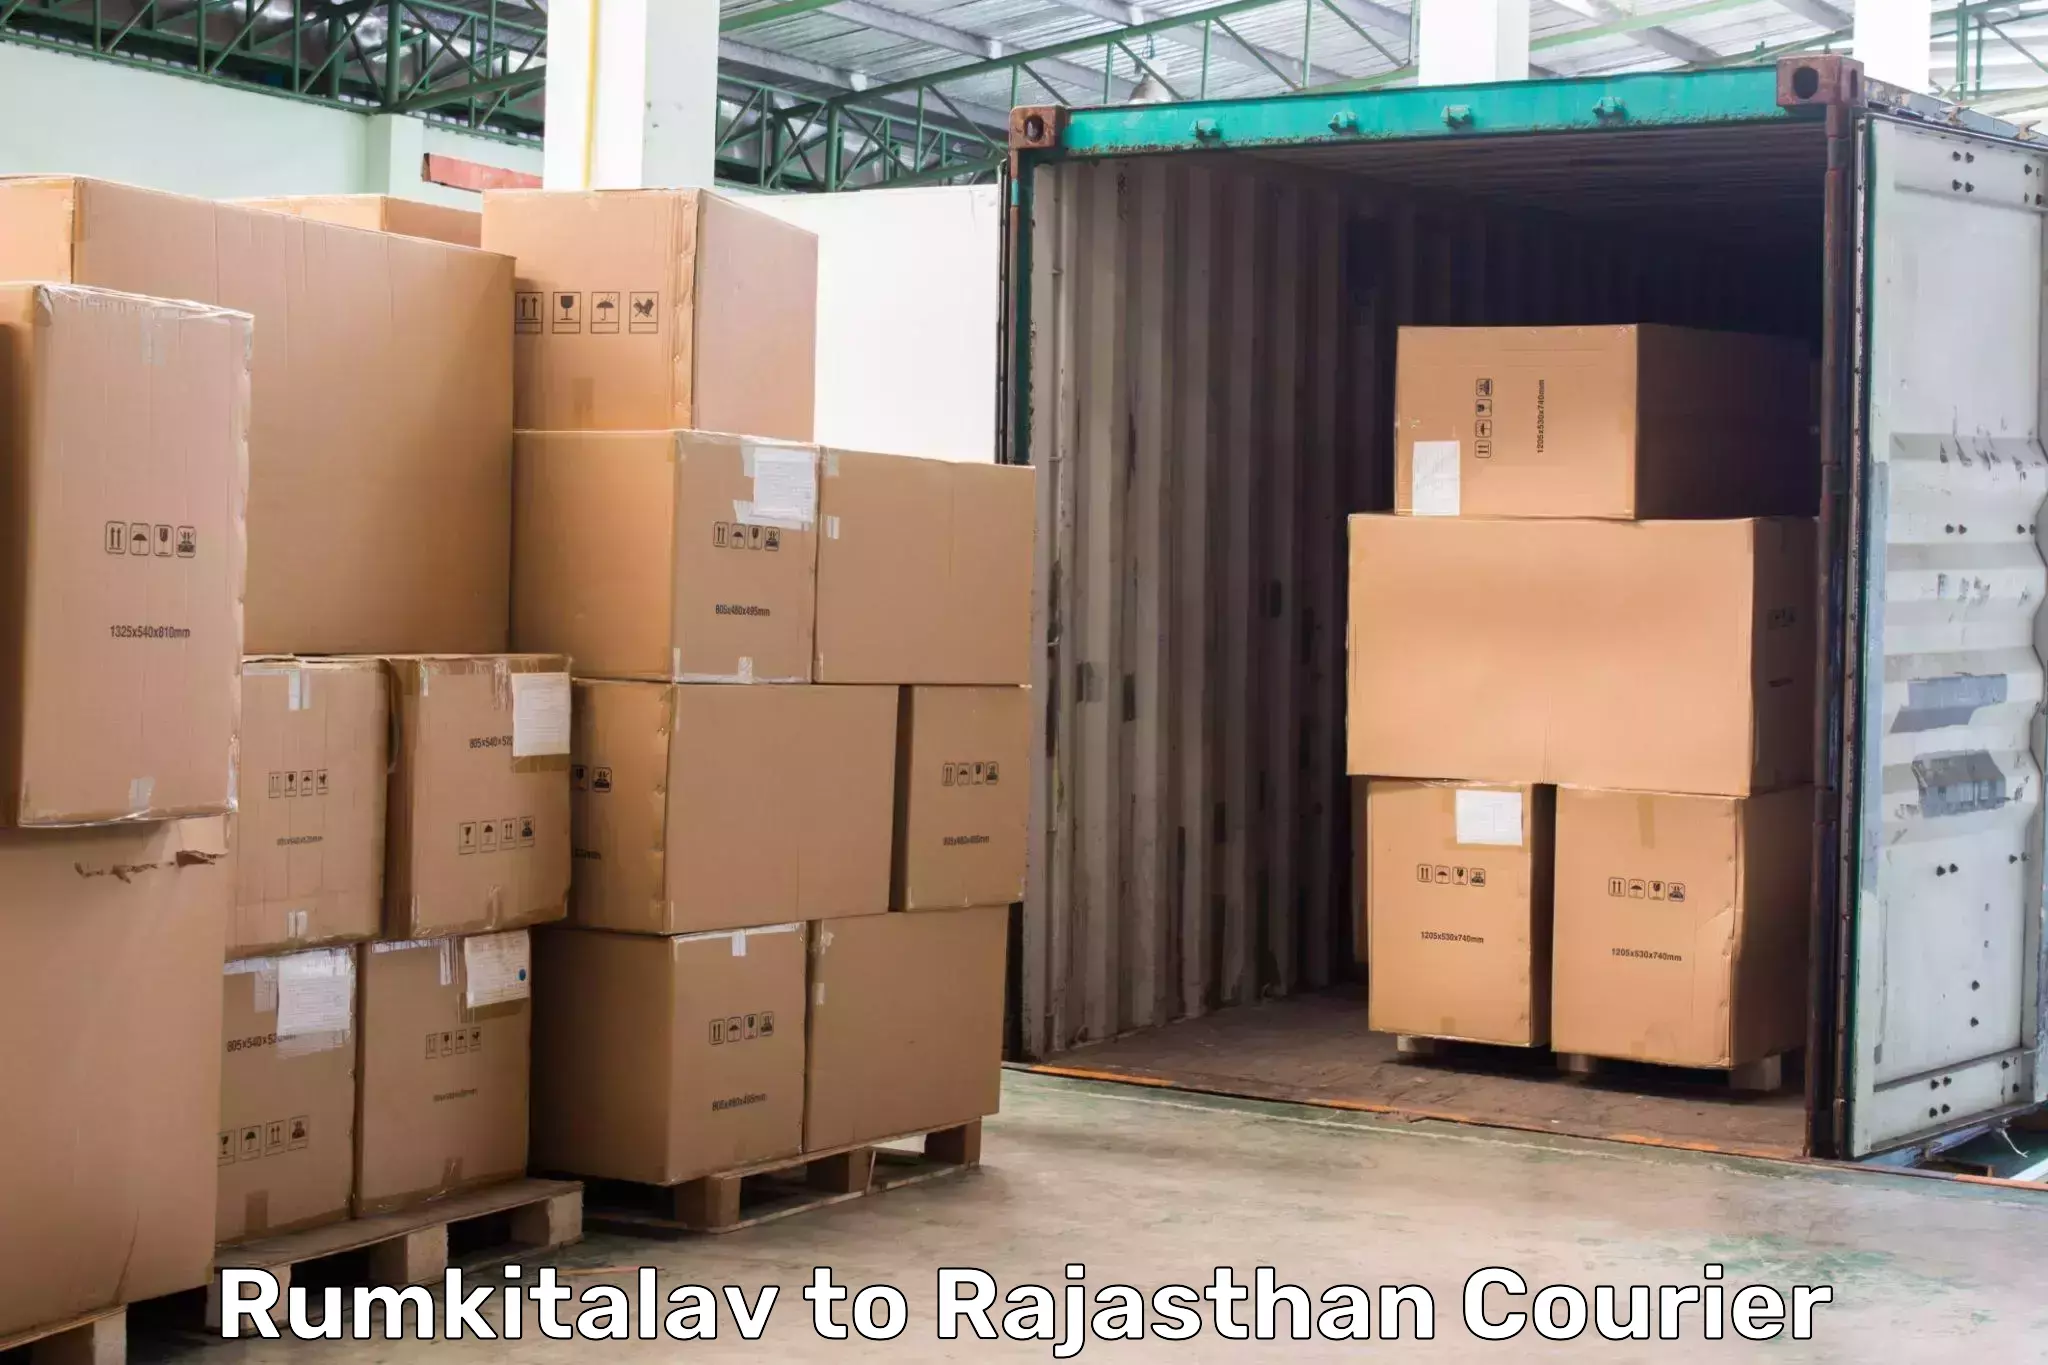 Nationwide parcel services Rumkitalav to Udaipur